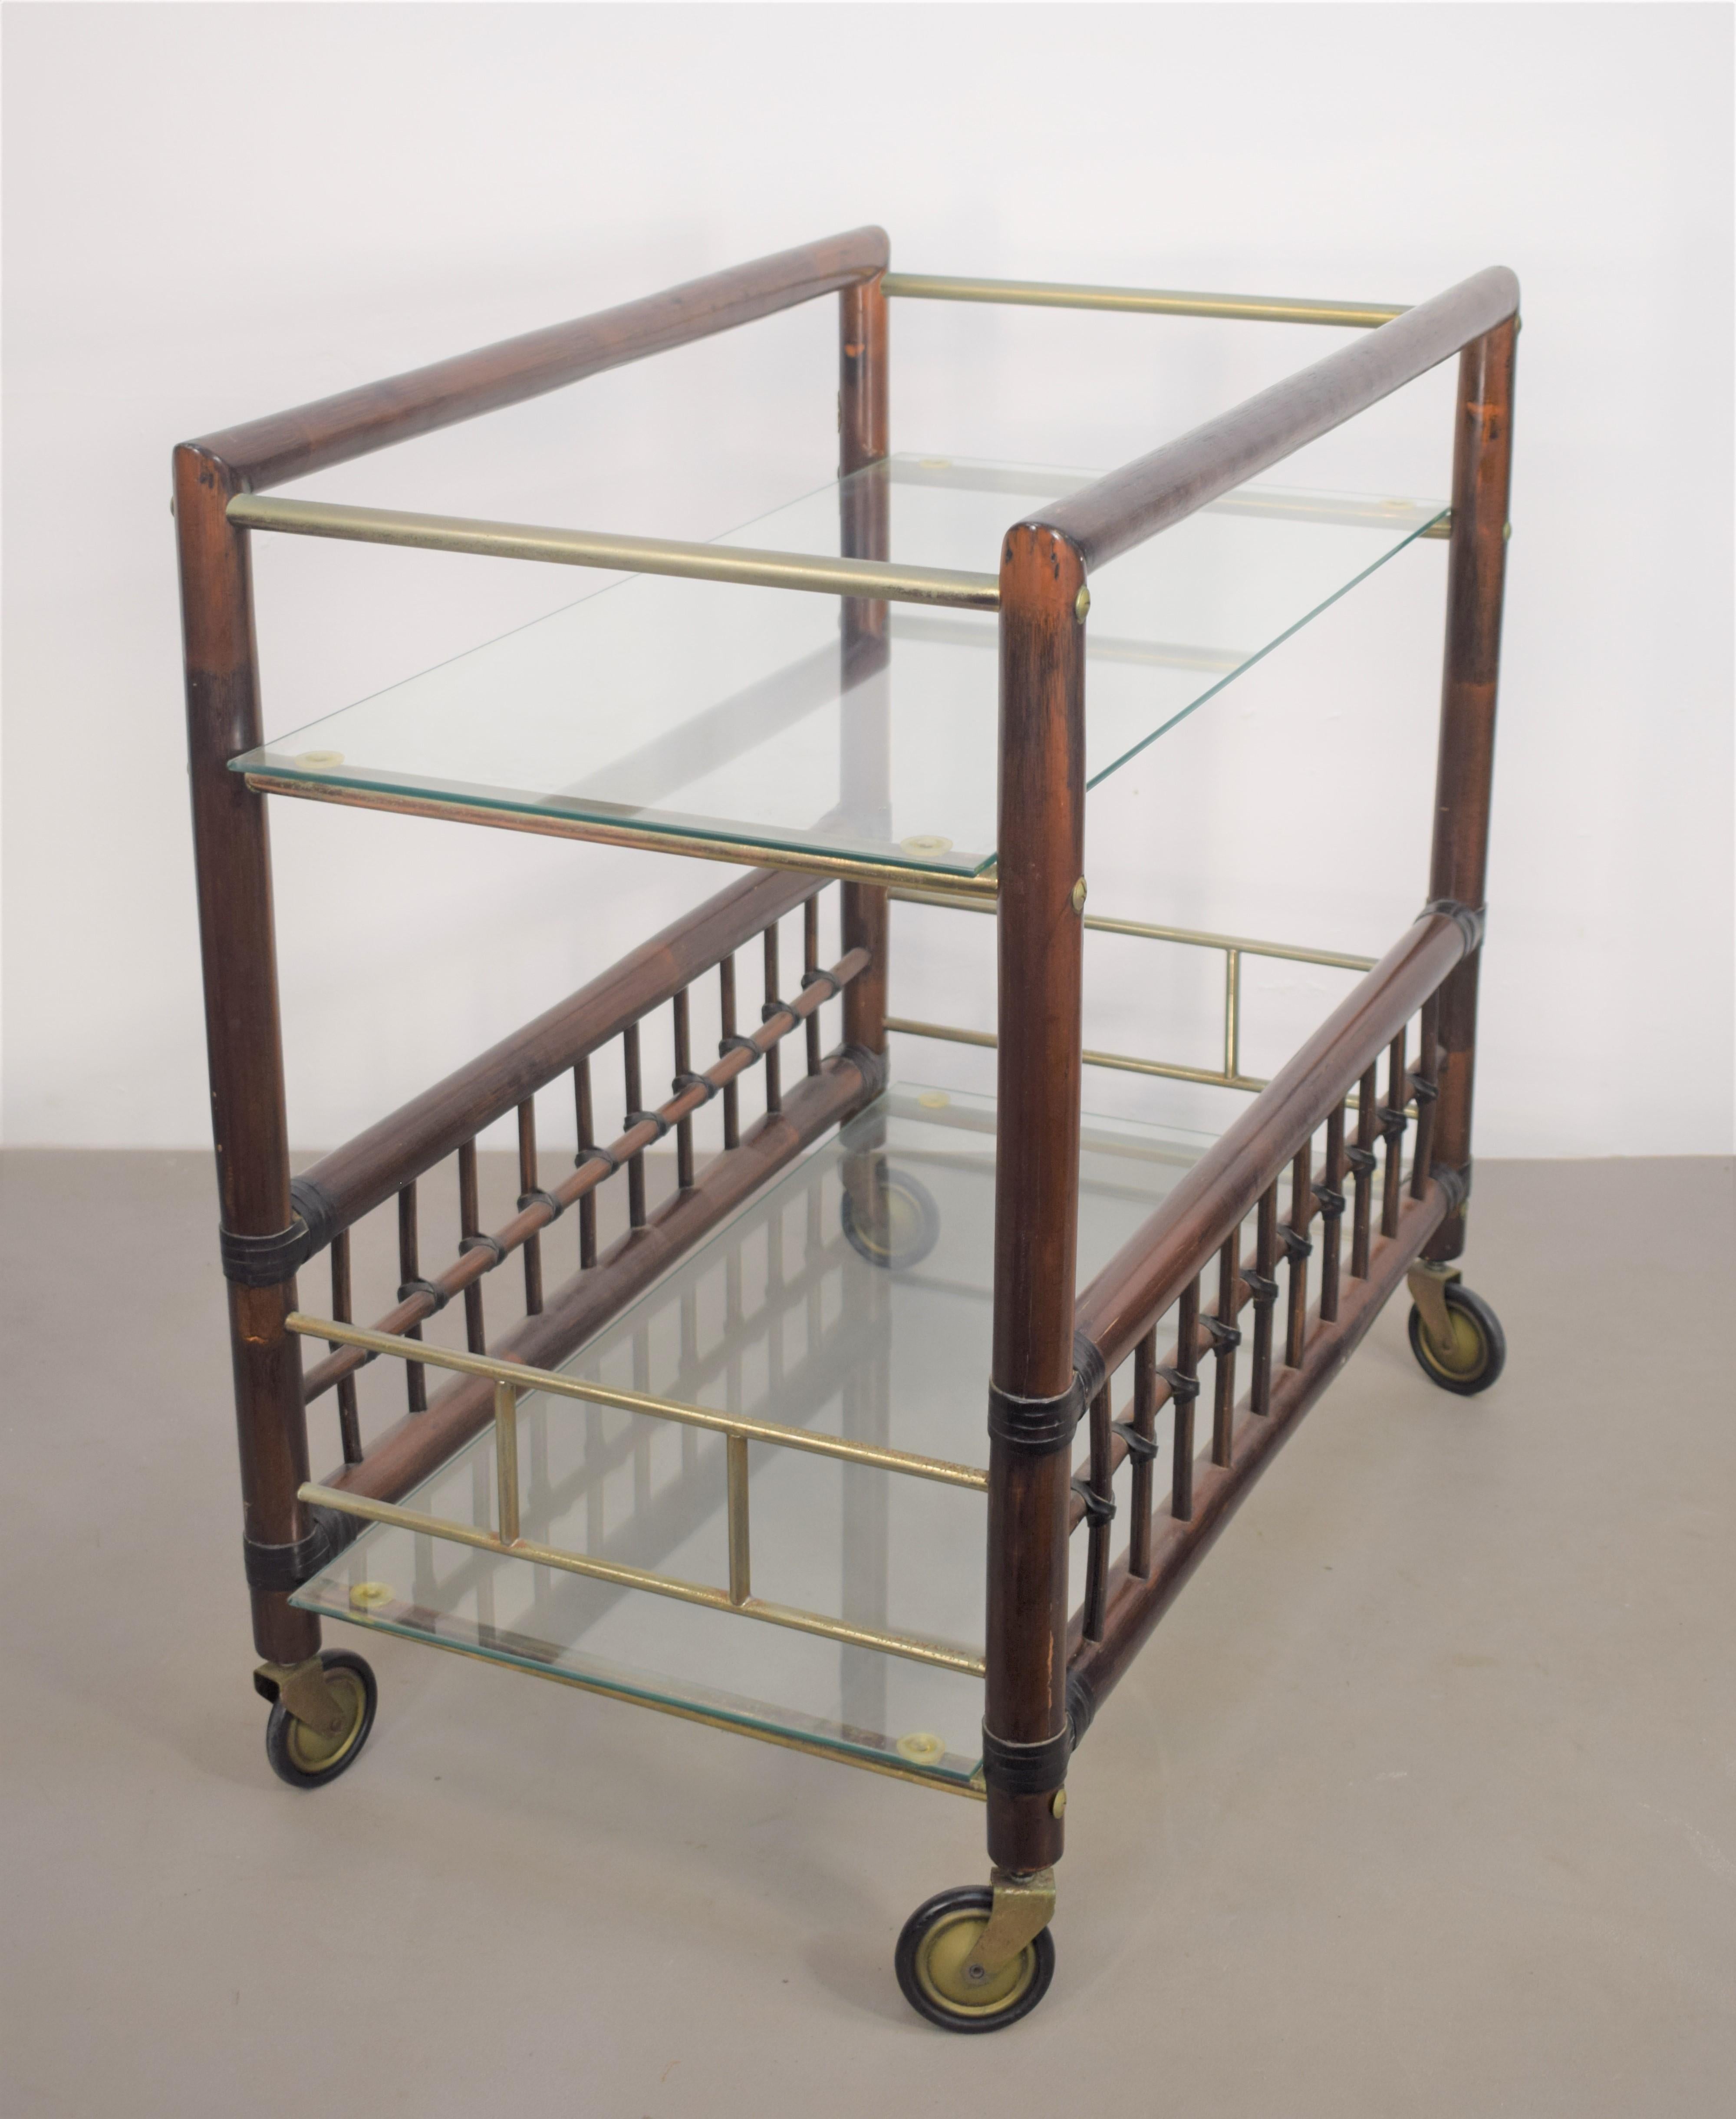 Italian bar cart in the style of Afra and Tobia Scarpa, 1960s.

Dimensions: H= 75cm; W= 76 cm; D=45 cm.